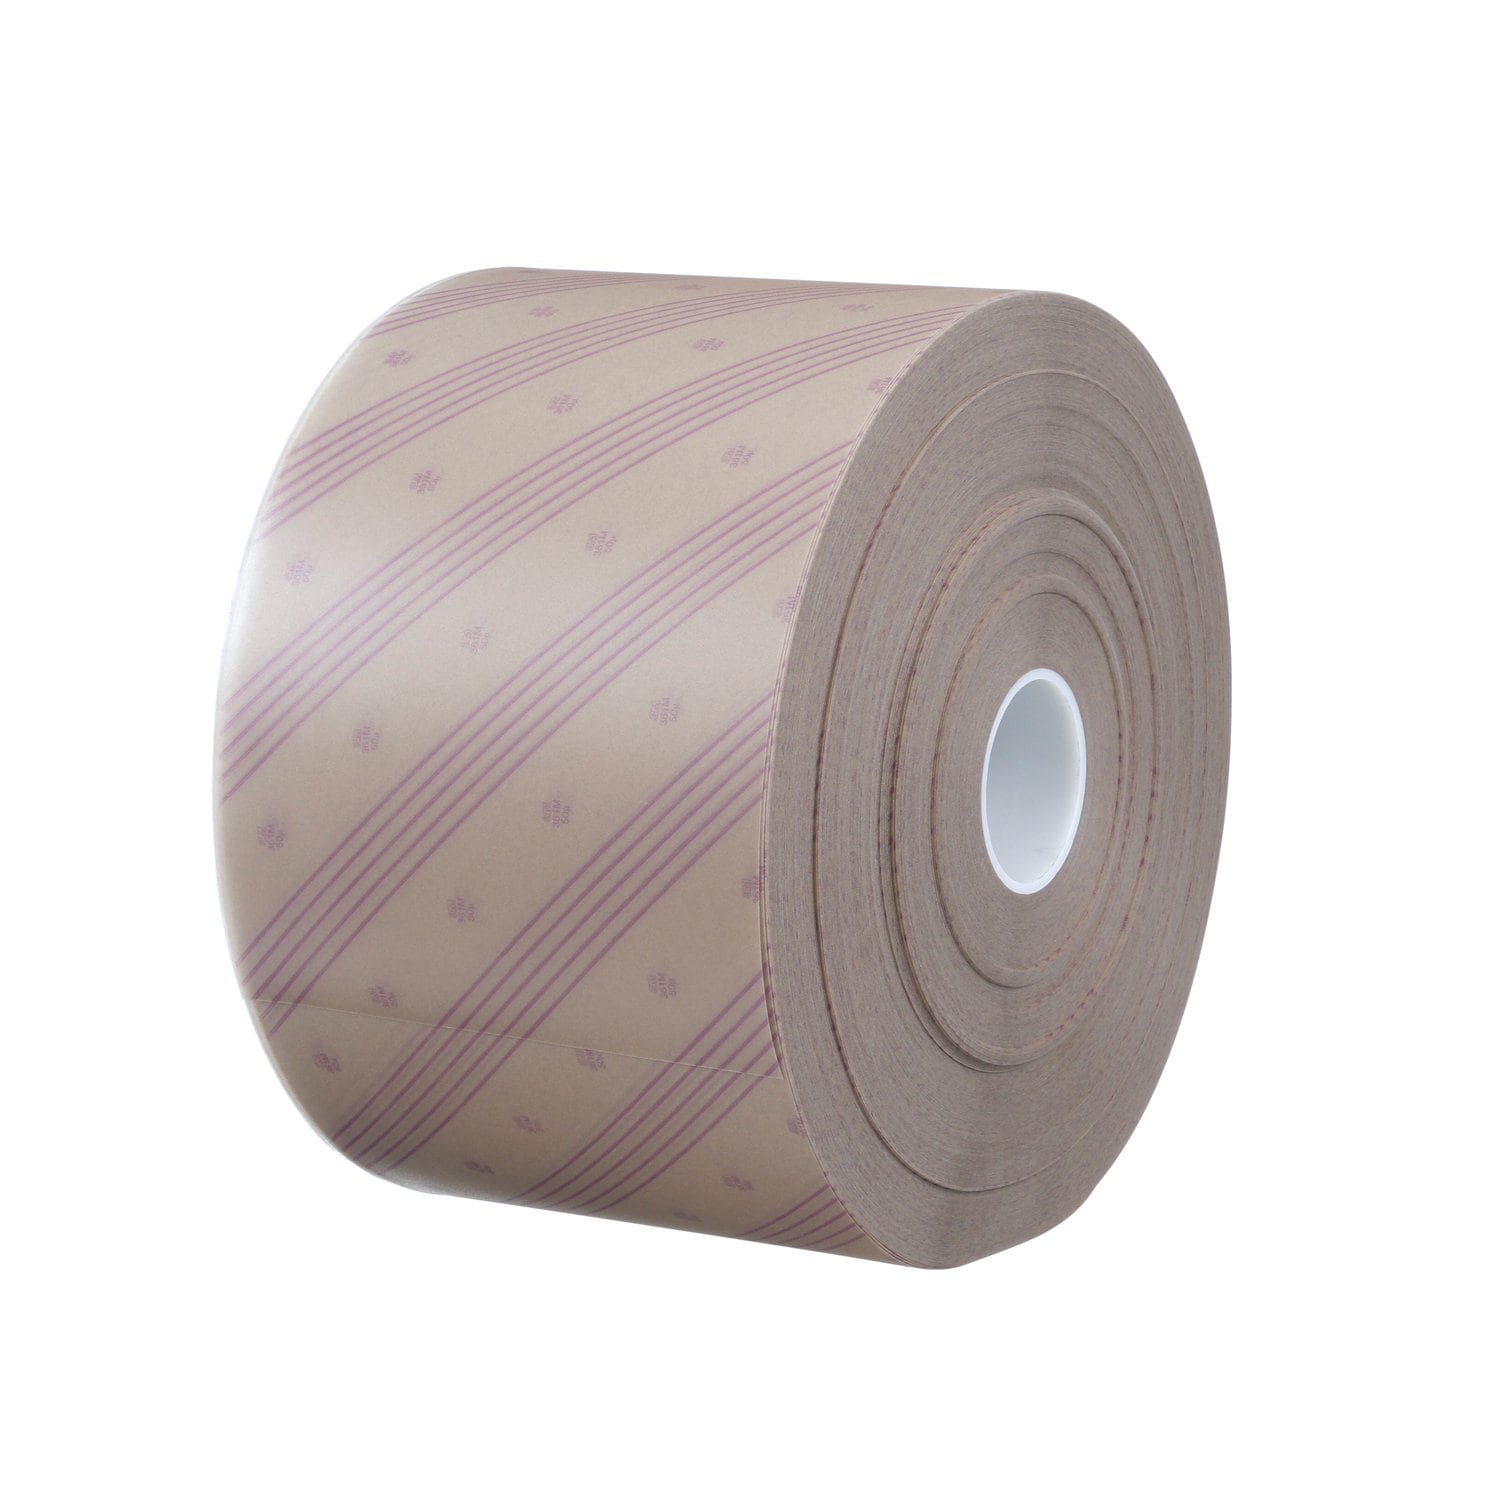 7100216900 - Unbranded Optical Film Roll 361MX, 15 Mic 5MIL, 36 in x 1800 ft, Cardboard Core, ASO